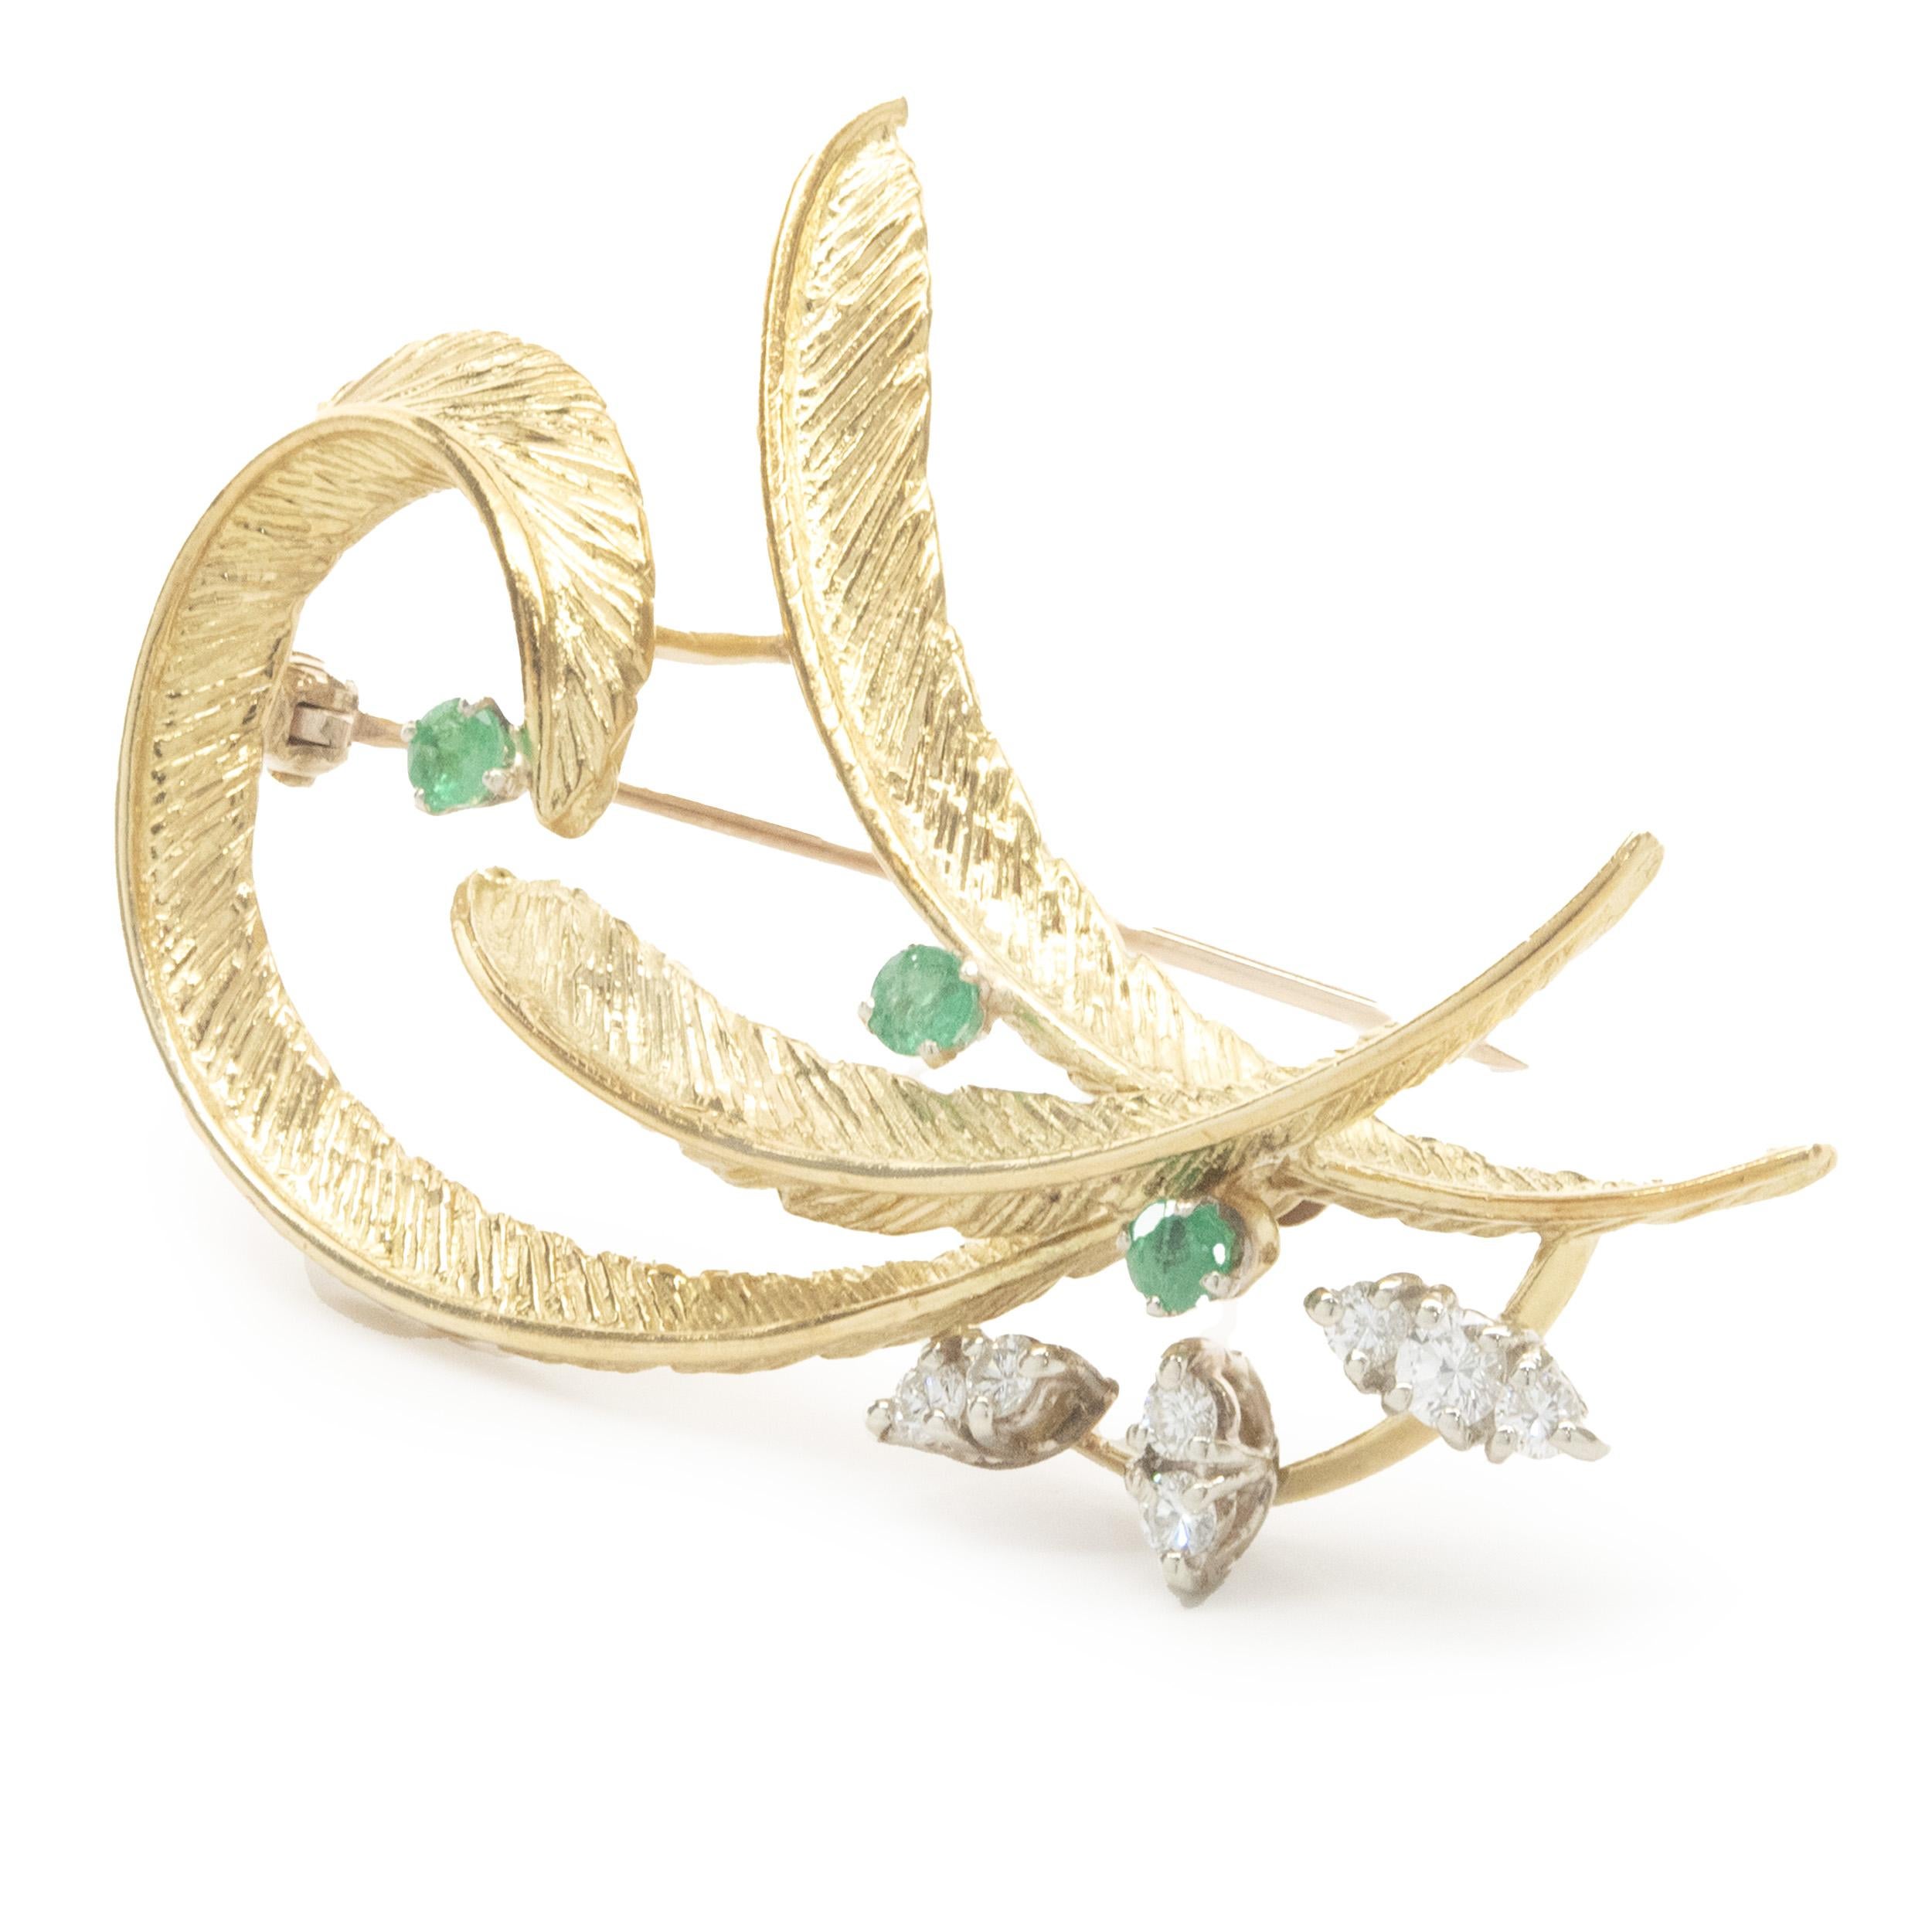 18 Karat Yellow Gold Vintage Emerald and Diamond Leaf Pin

Designer: custom
Material: 18K yellow gold
Weight:  9.53 grams
Dimensions: pin measures 2 x 1.5-inches in diameter